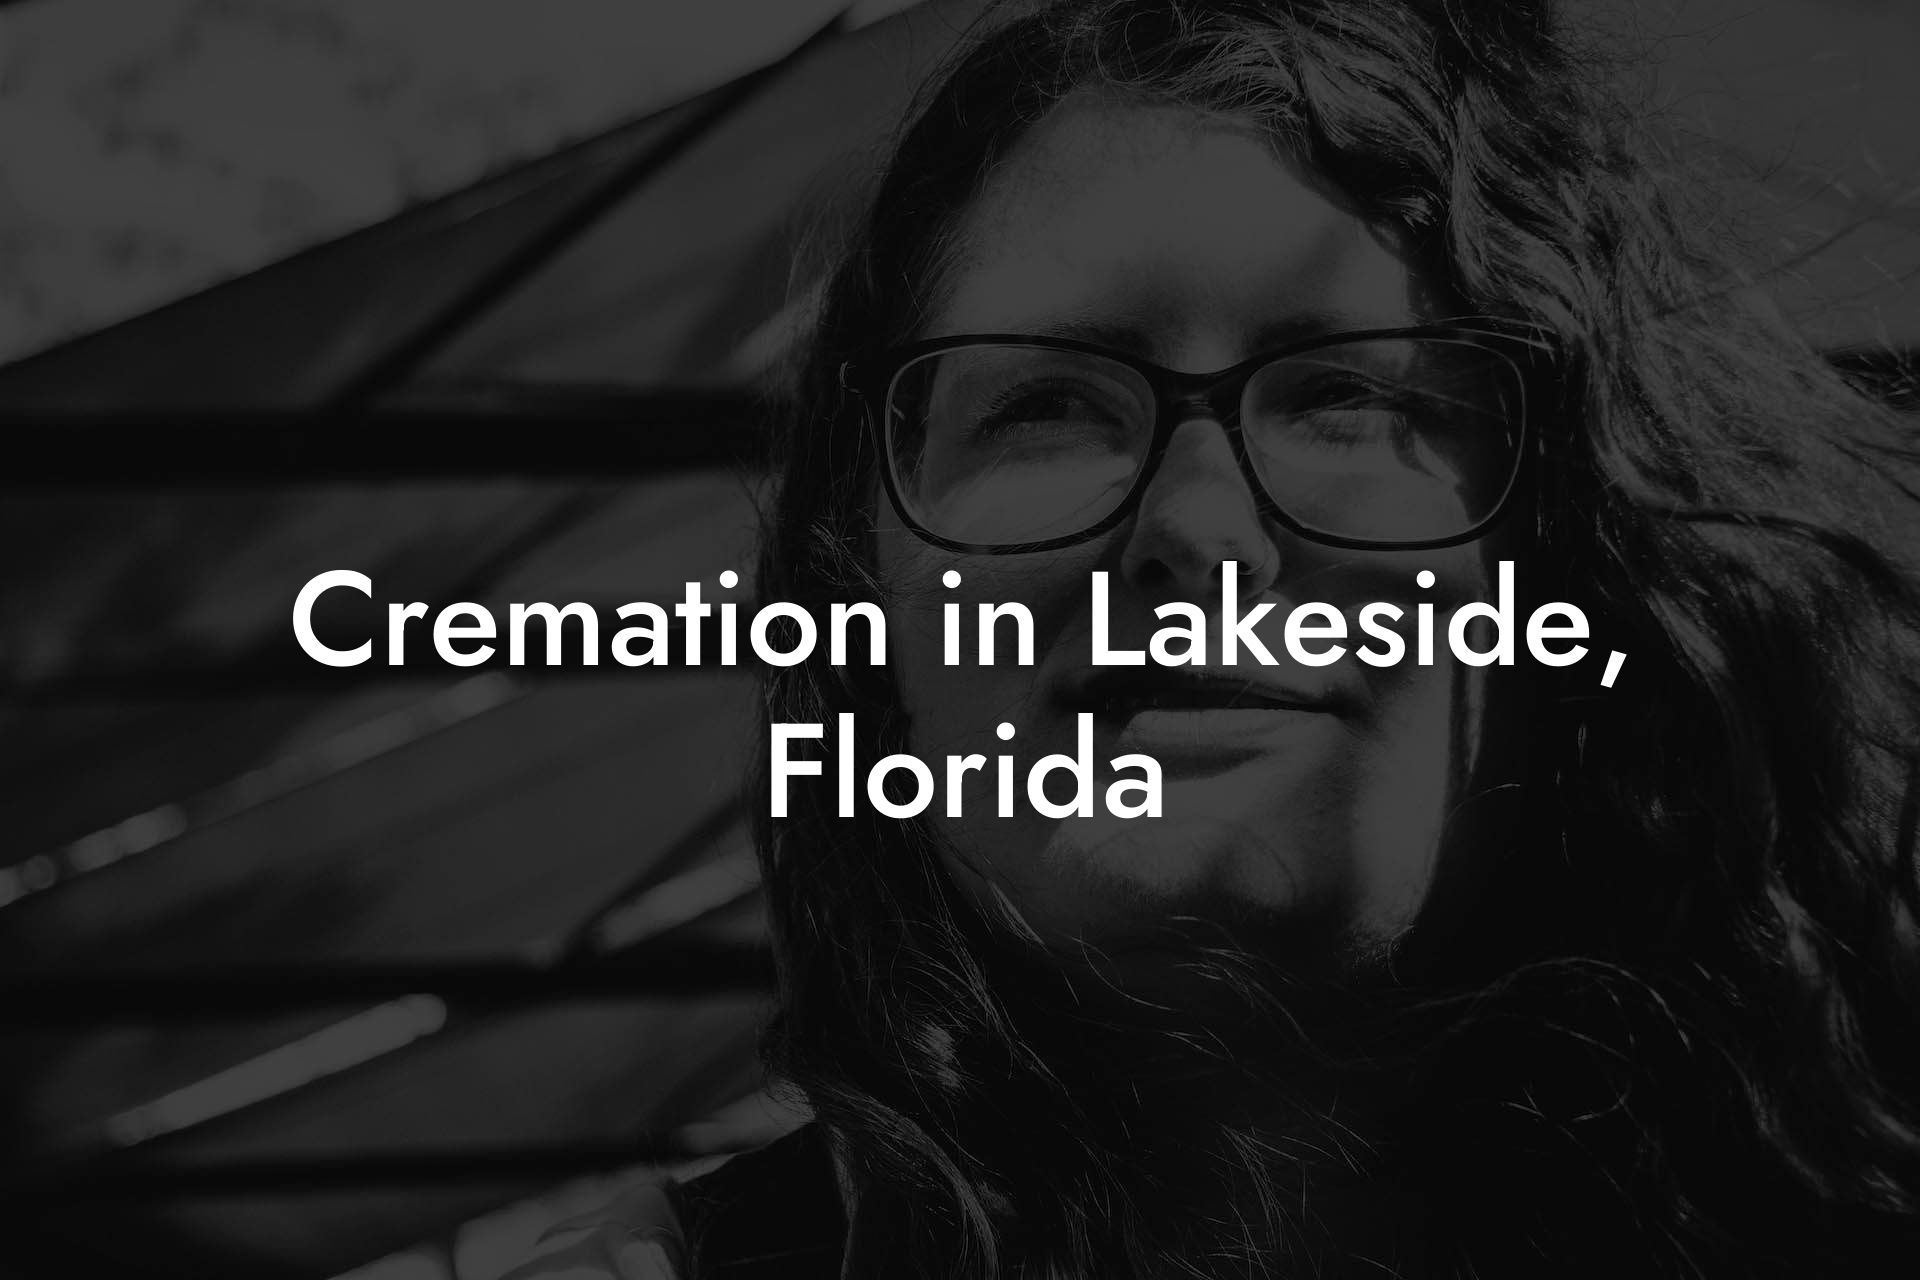 Cremation in Lakeside, Florida